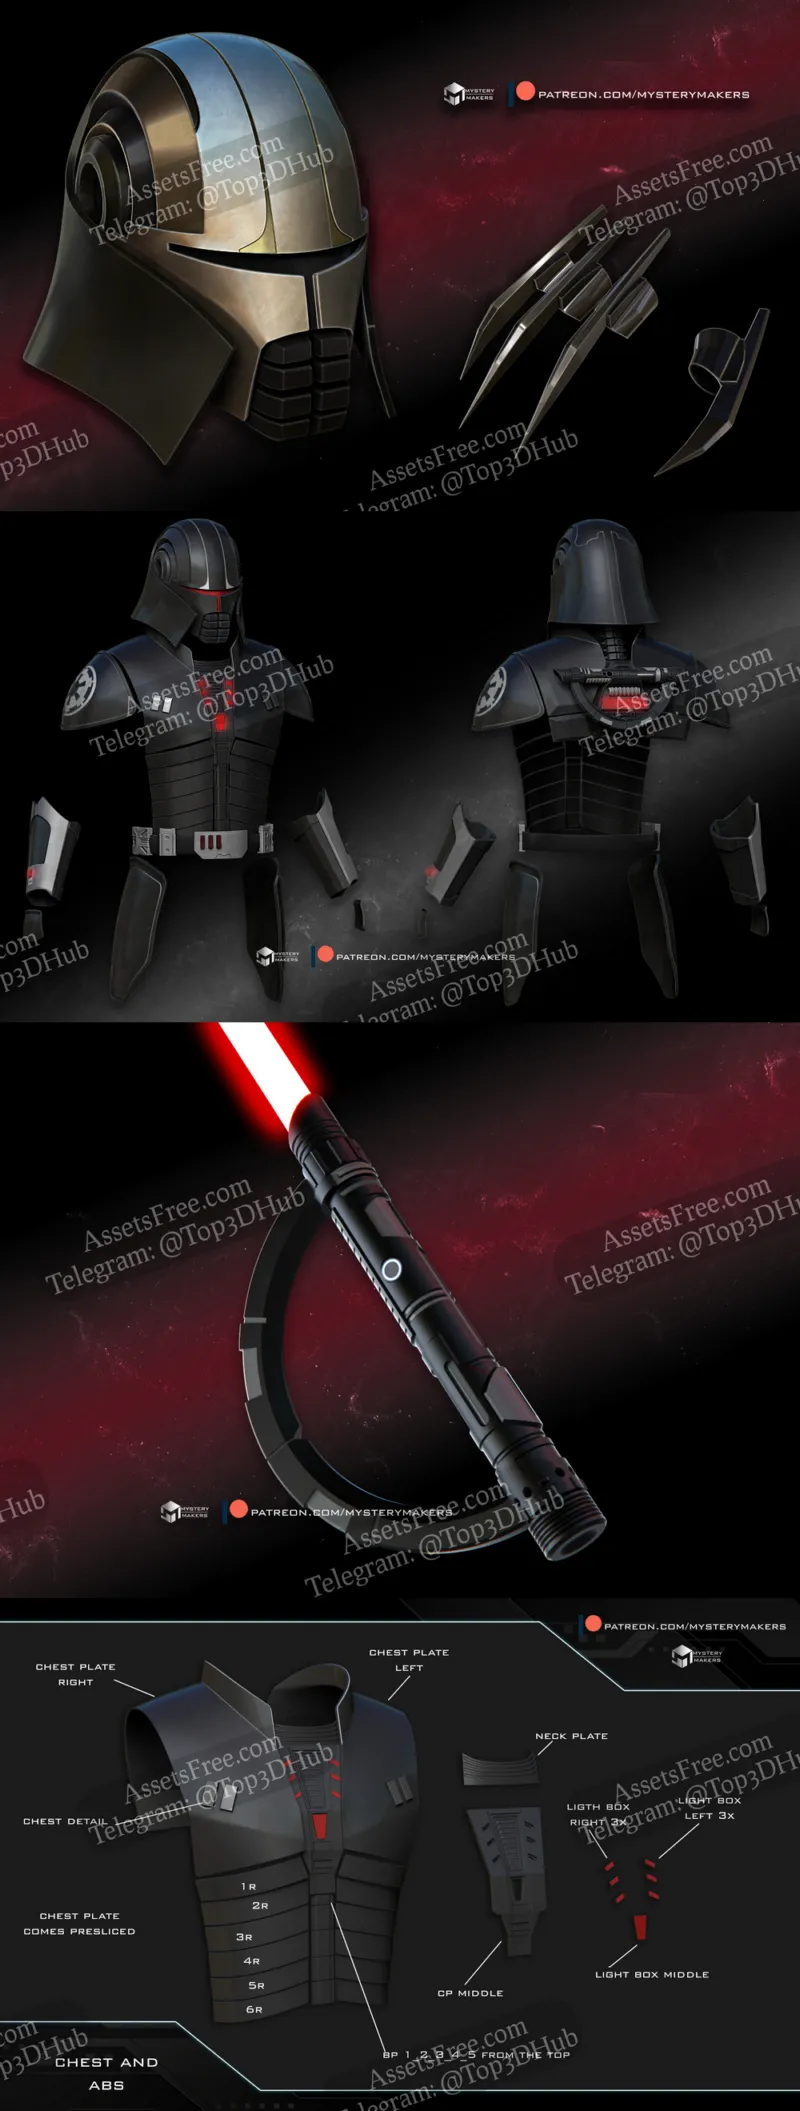 Inquisitor Starkiller armor and Starkiller helmet and claws